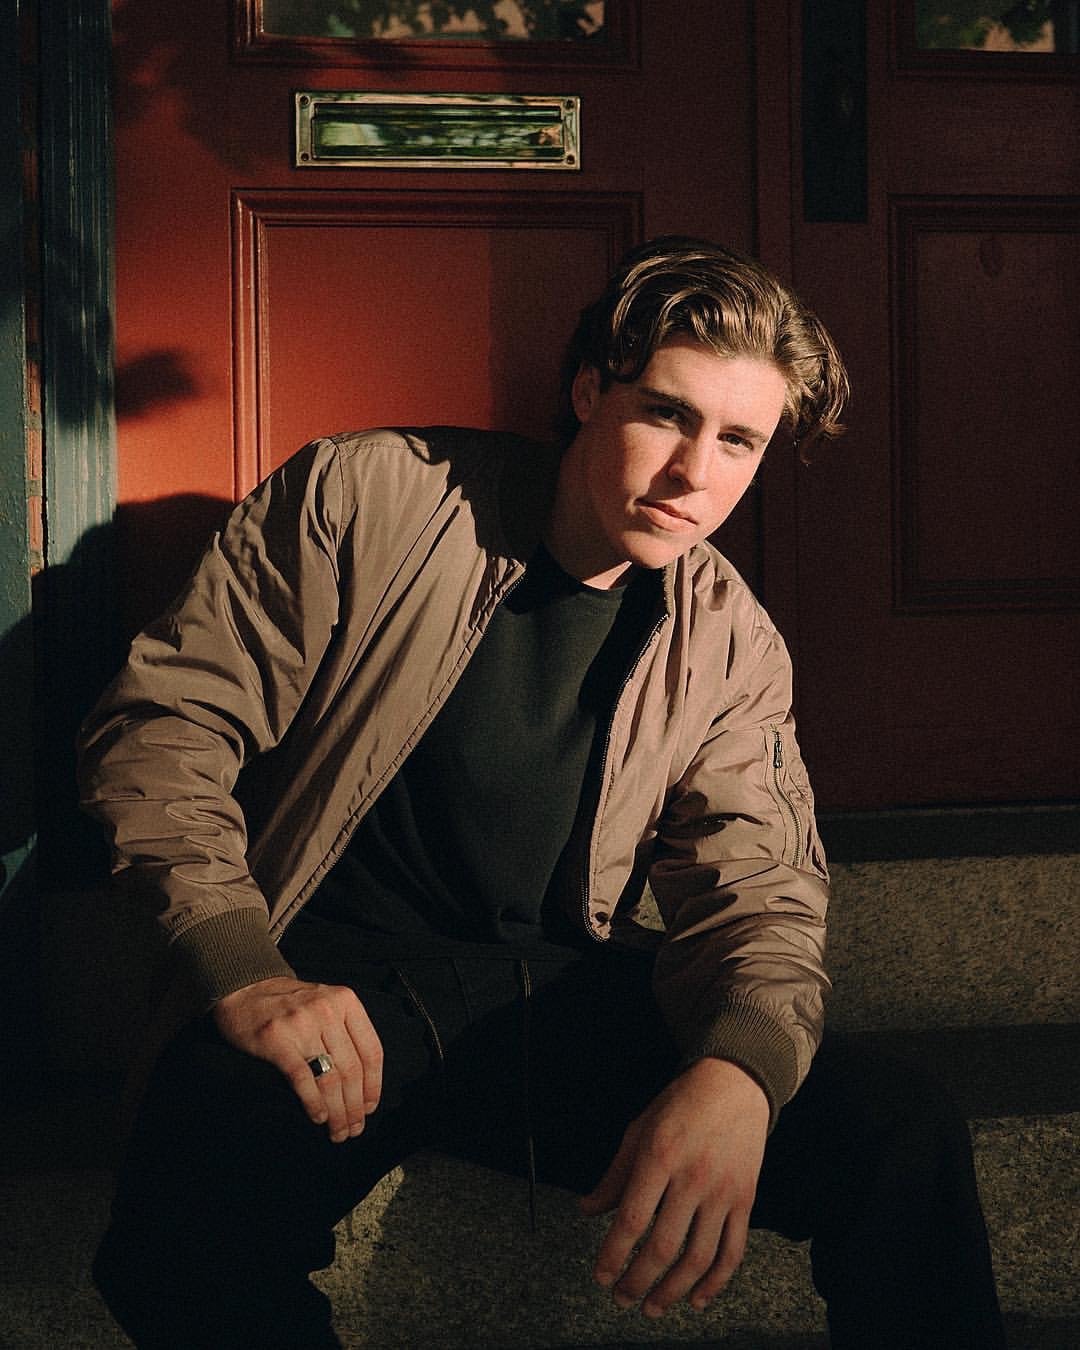 Former "American Idol" contestant Sam Woolf in a recent photoshoot | Photo: Courtesy of Sam Woolf